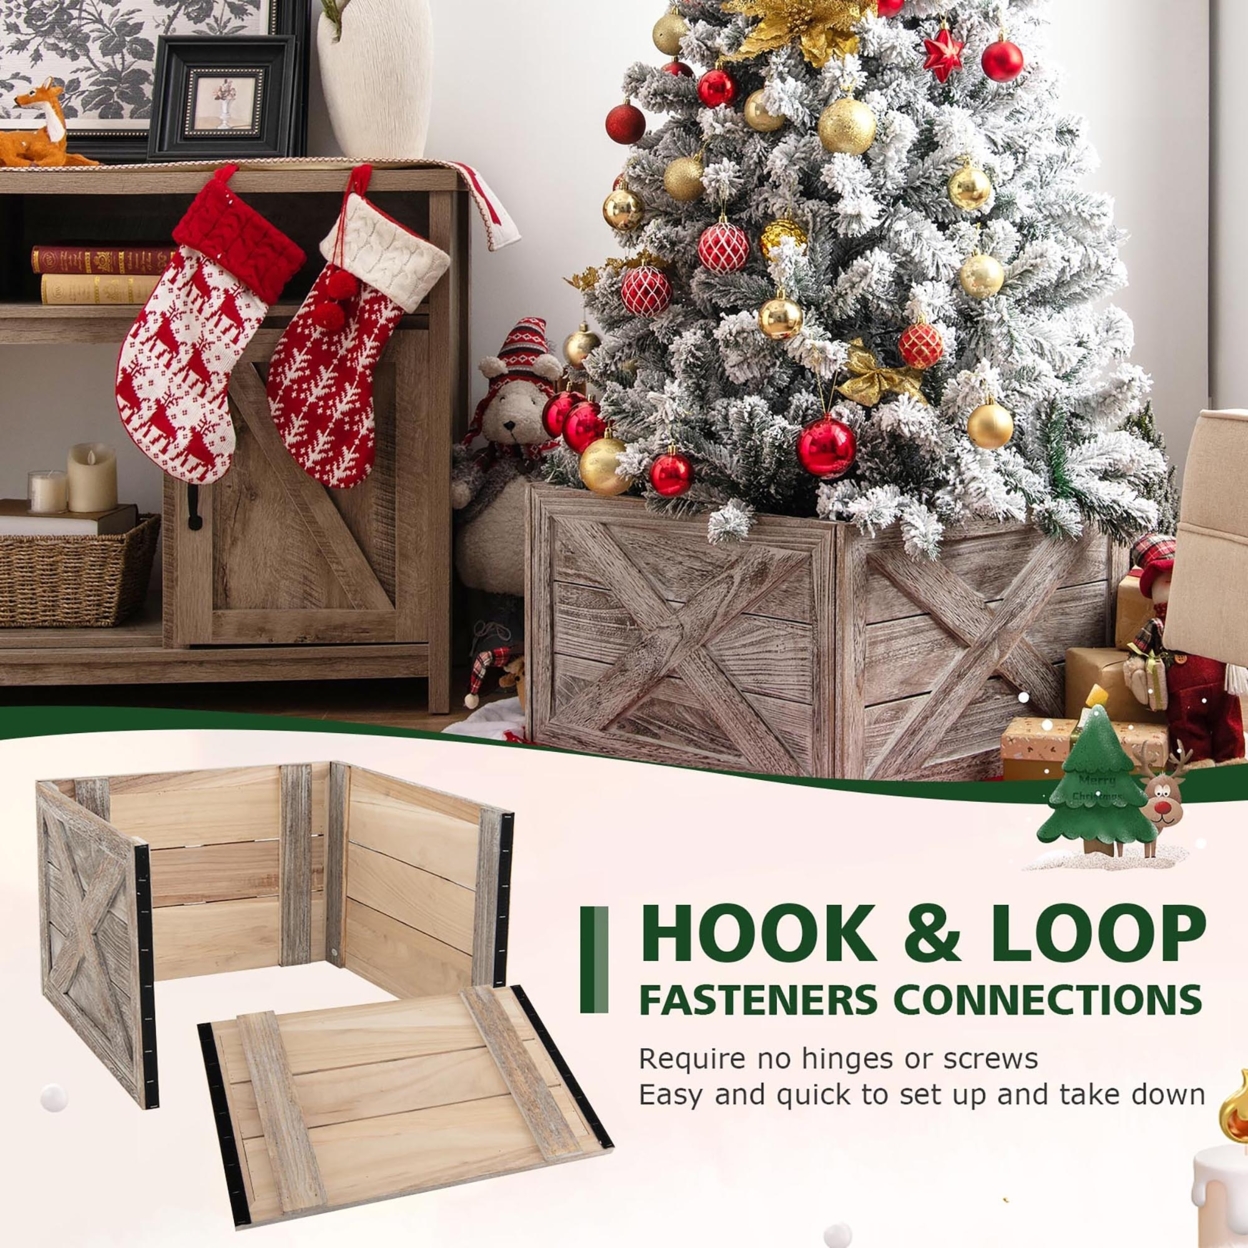 30.5 X 22.5 Inches Solid Wooden Christmas Tree Box W/ Hook & Loop Fasteners - Brown